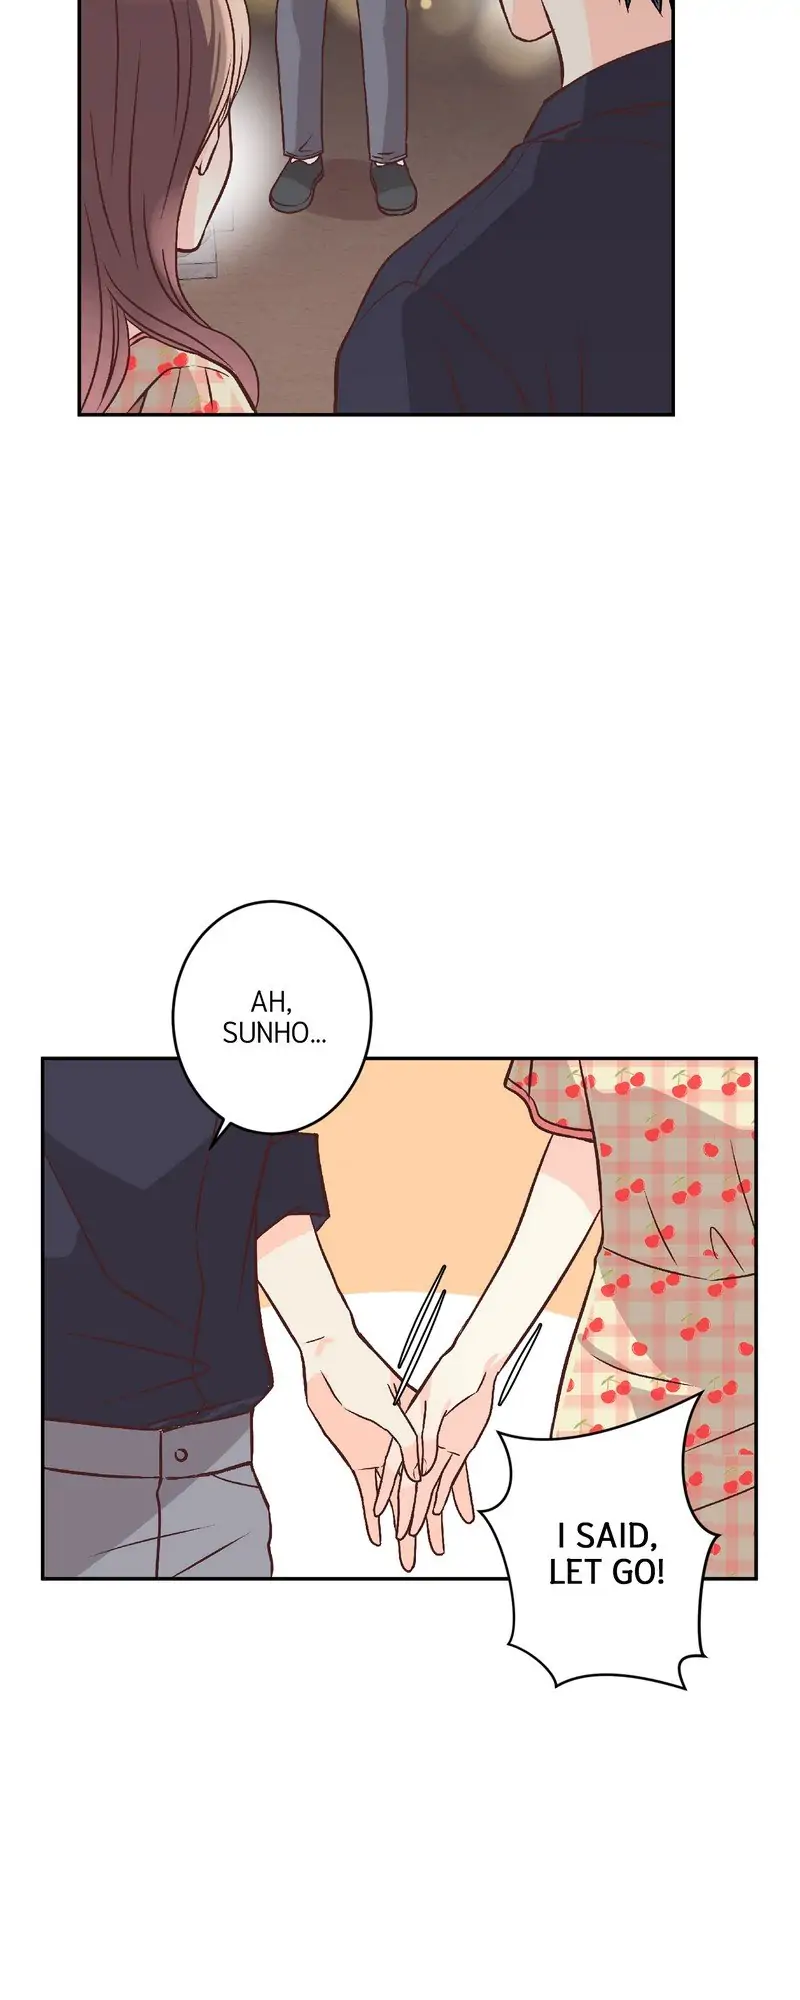 Is This True Love? - 46 page 2-7c60ead1